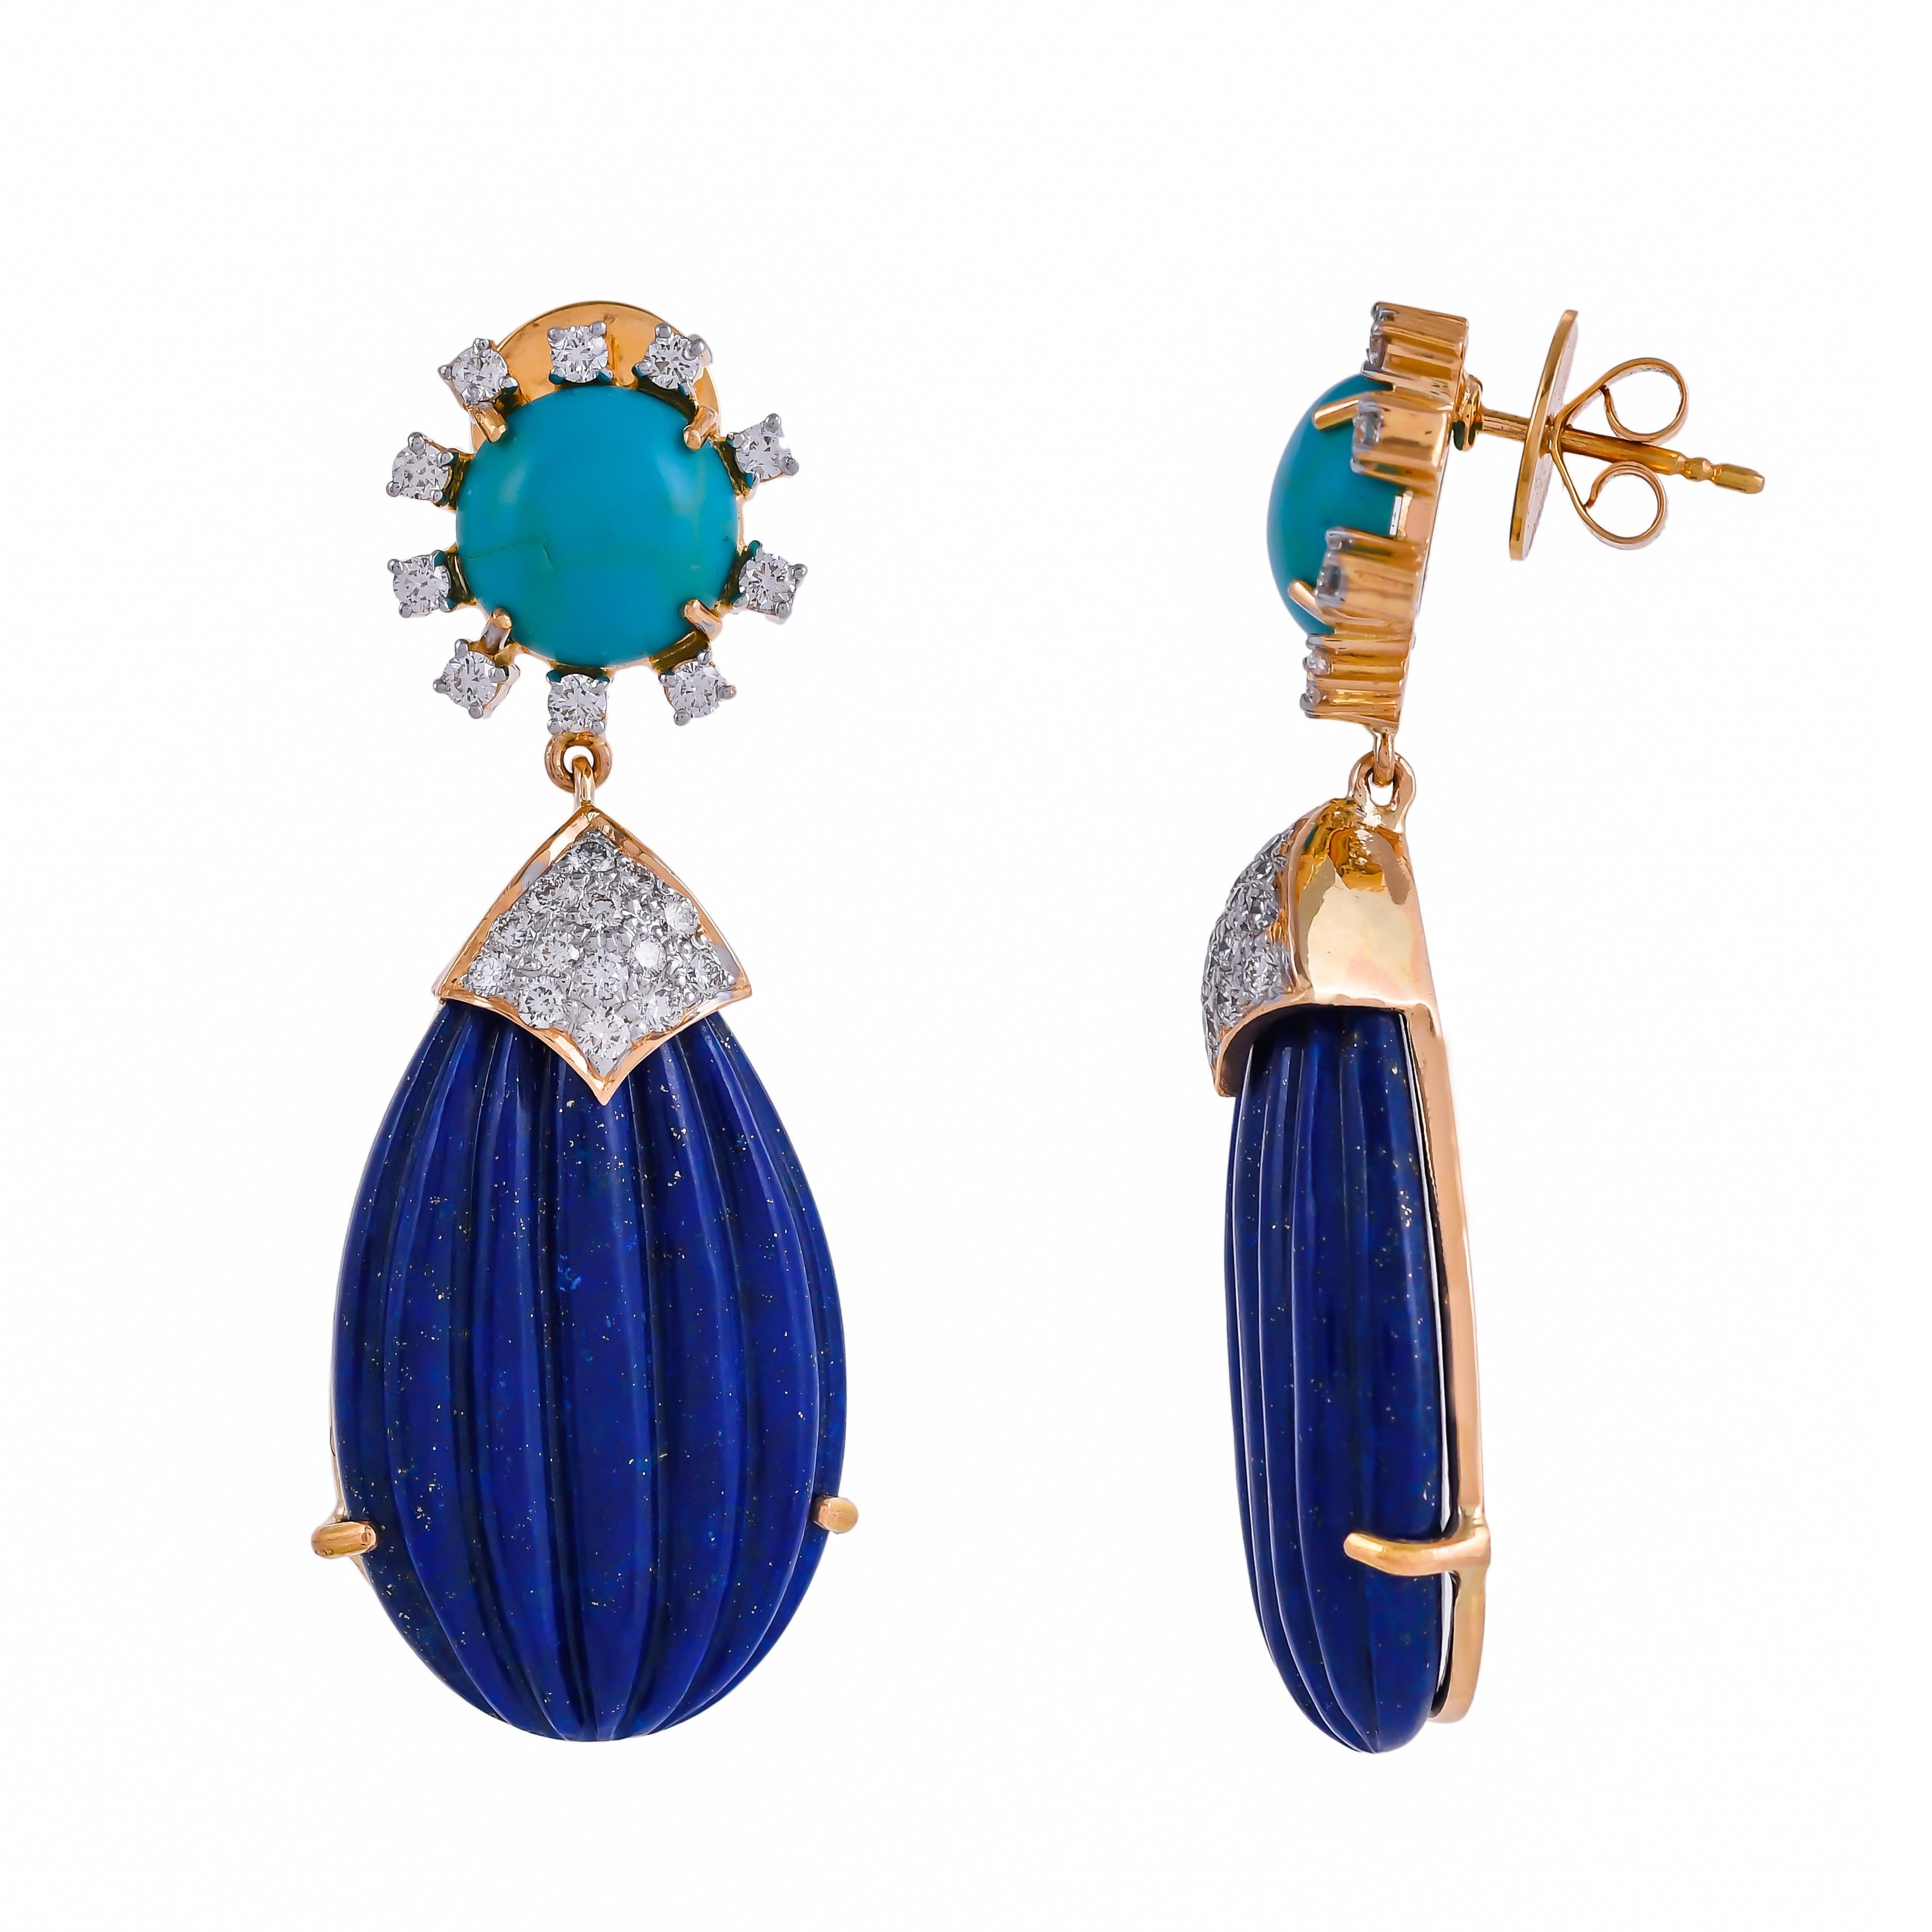 This teardrop earring by Exquisite Fine Jewellery is mounted in 18 karats yellow gold supporting two pear-shaped beautifully carved 55.88 carats lapis lazuli drops, 5.22 carats turquoise and 1.29 carats diamonds.
The design is contemporary yet chic